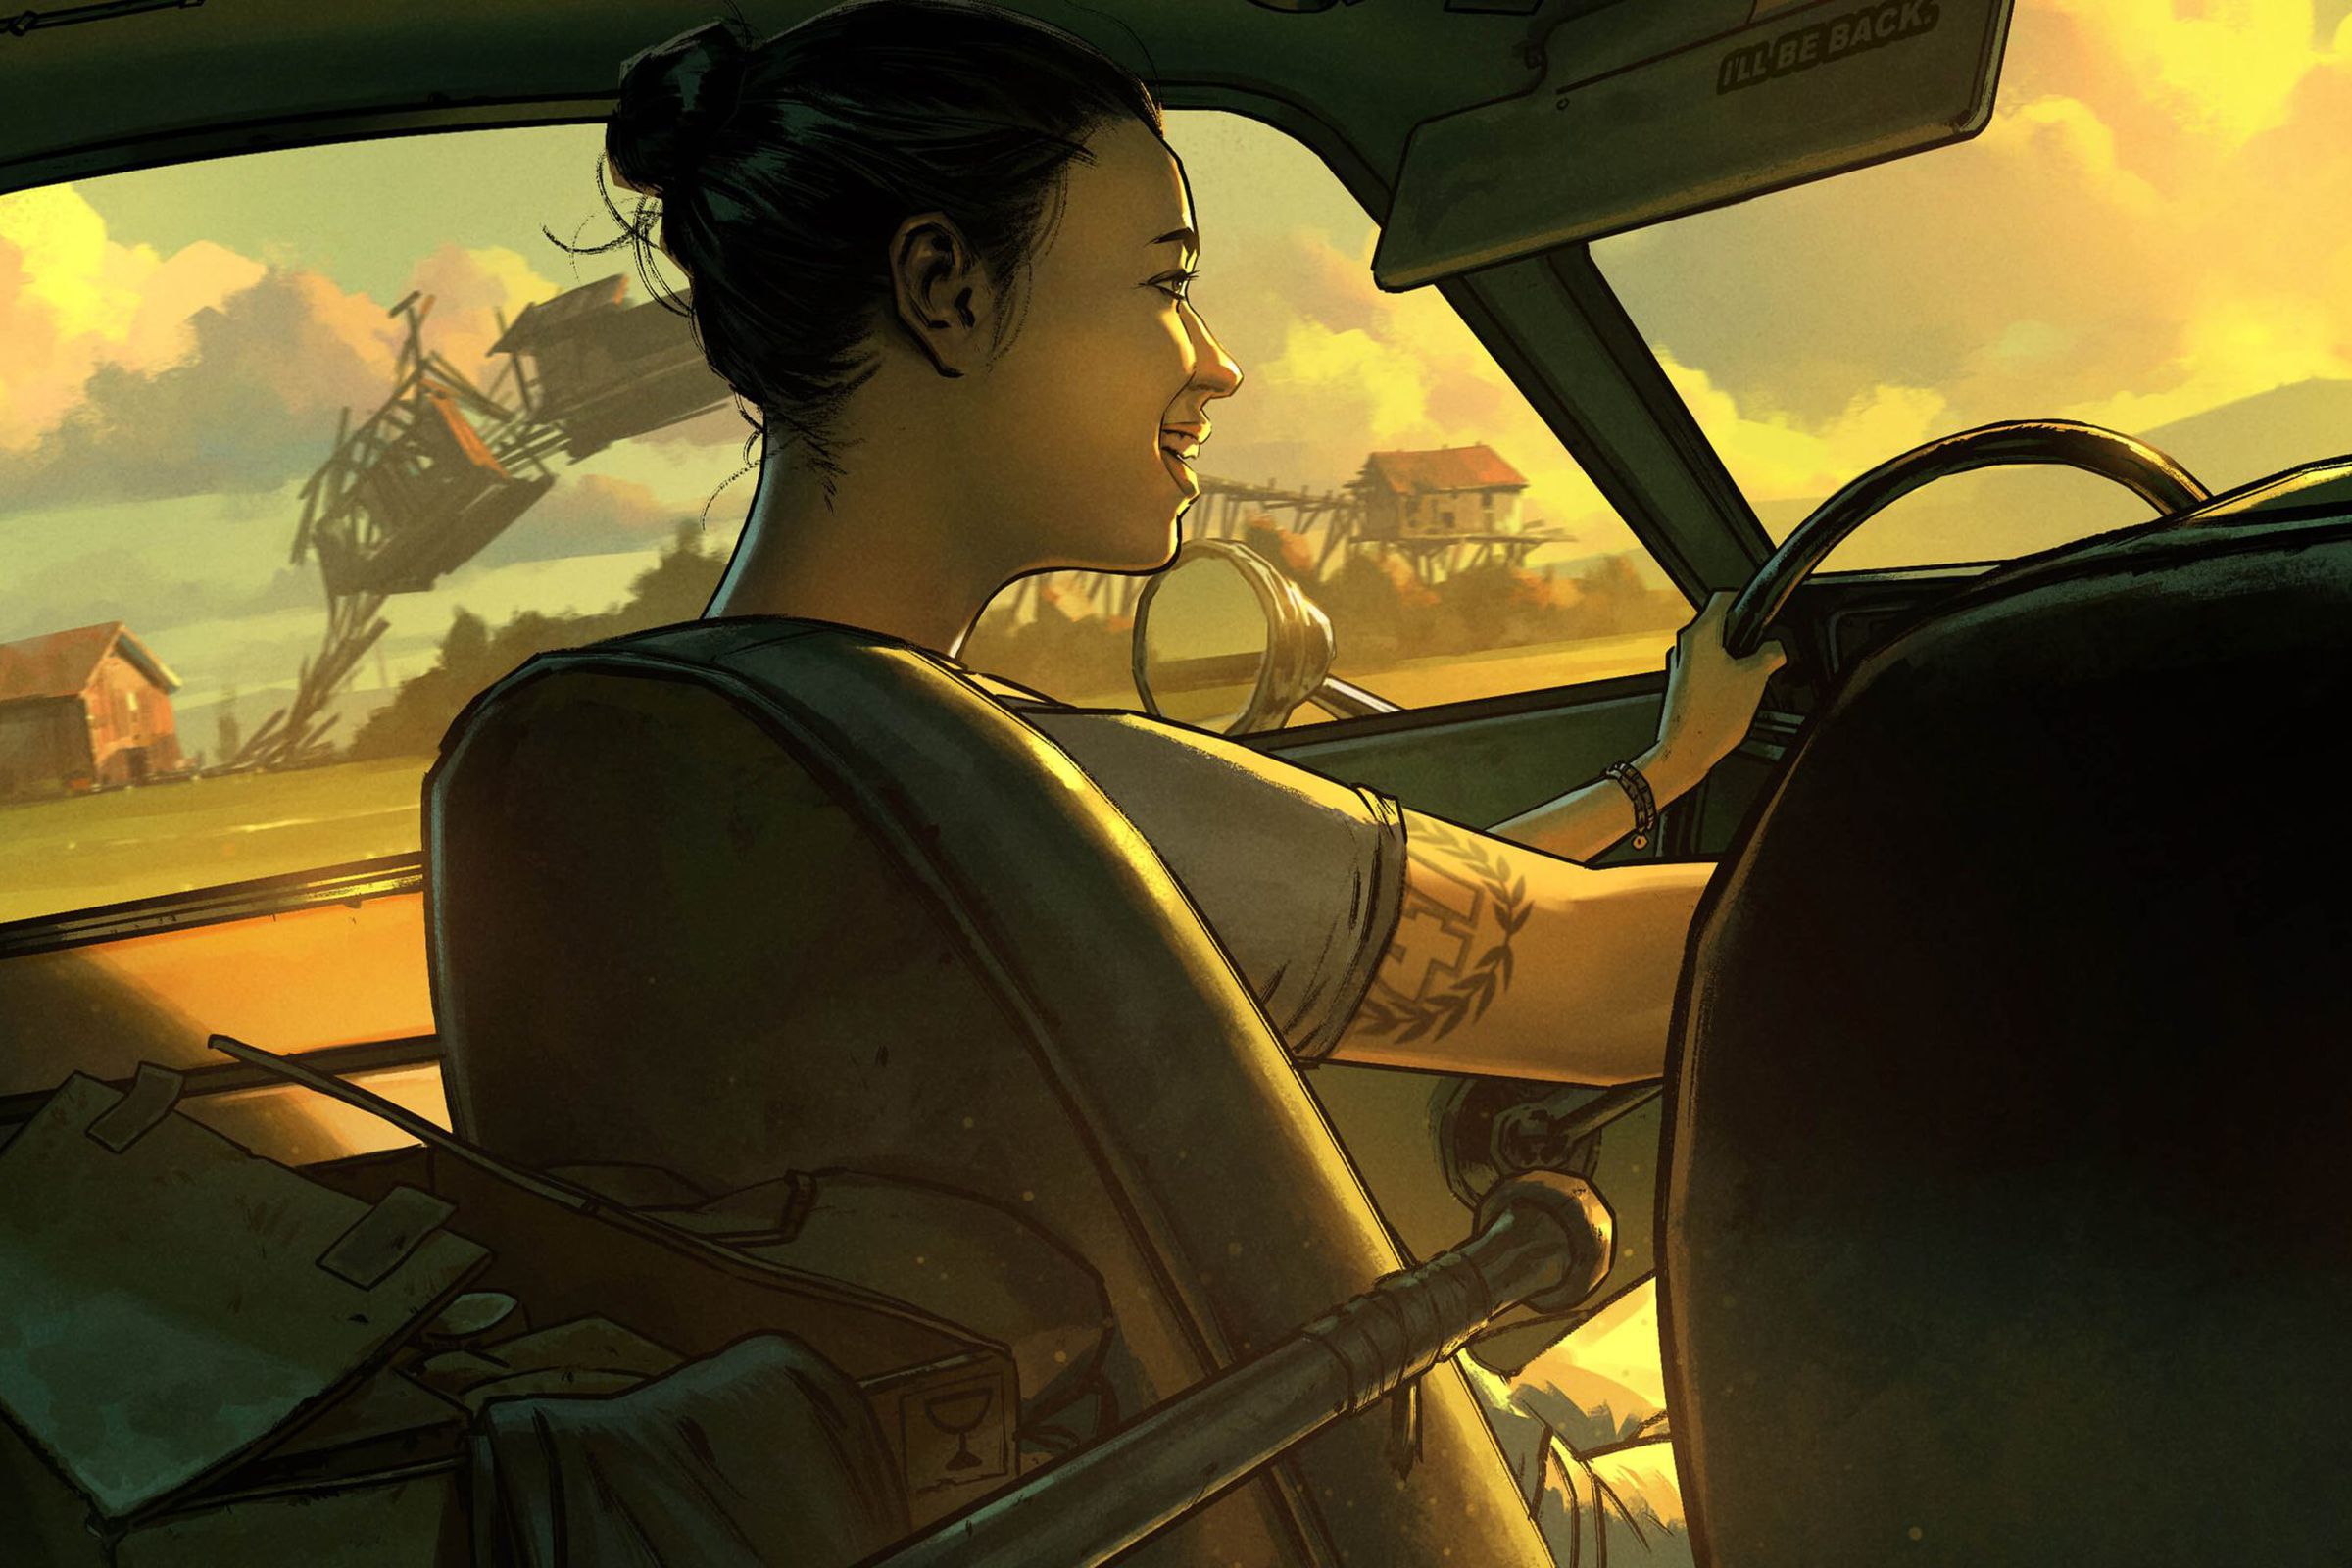 Key art from Blank’s new, as yet unnamed game featuring a woman with a tattoo smiling as she drives a car through what looks to be a desert.